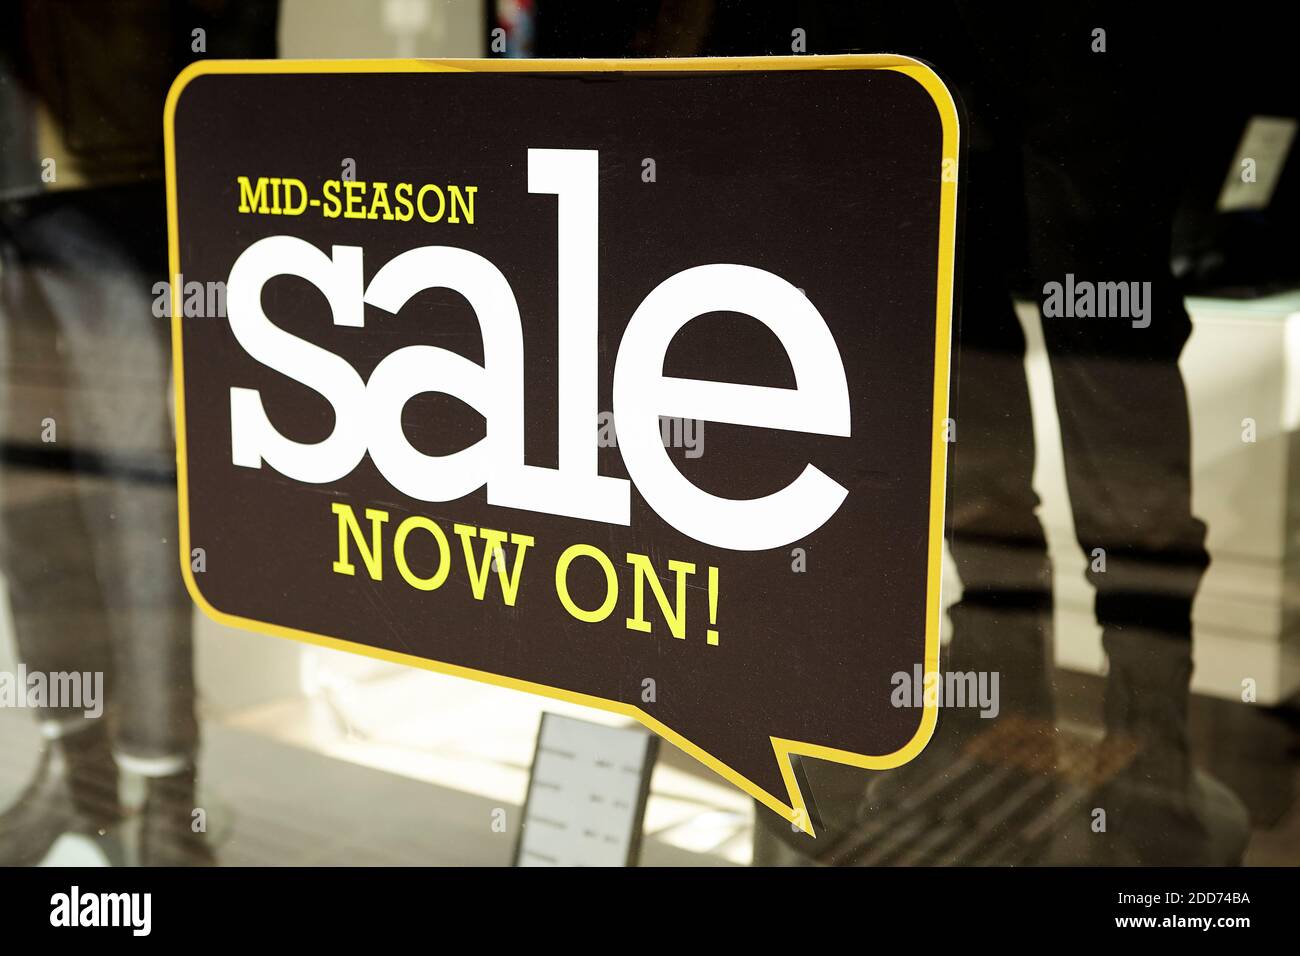 Mid Season Sales High Resolution Stock Photography and Images - Alamy